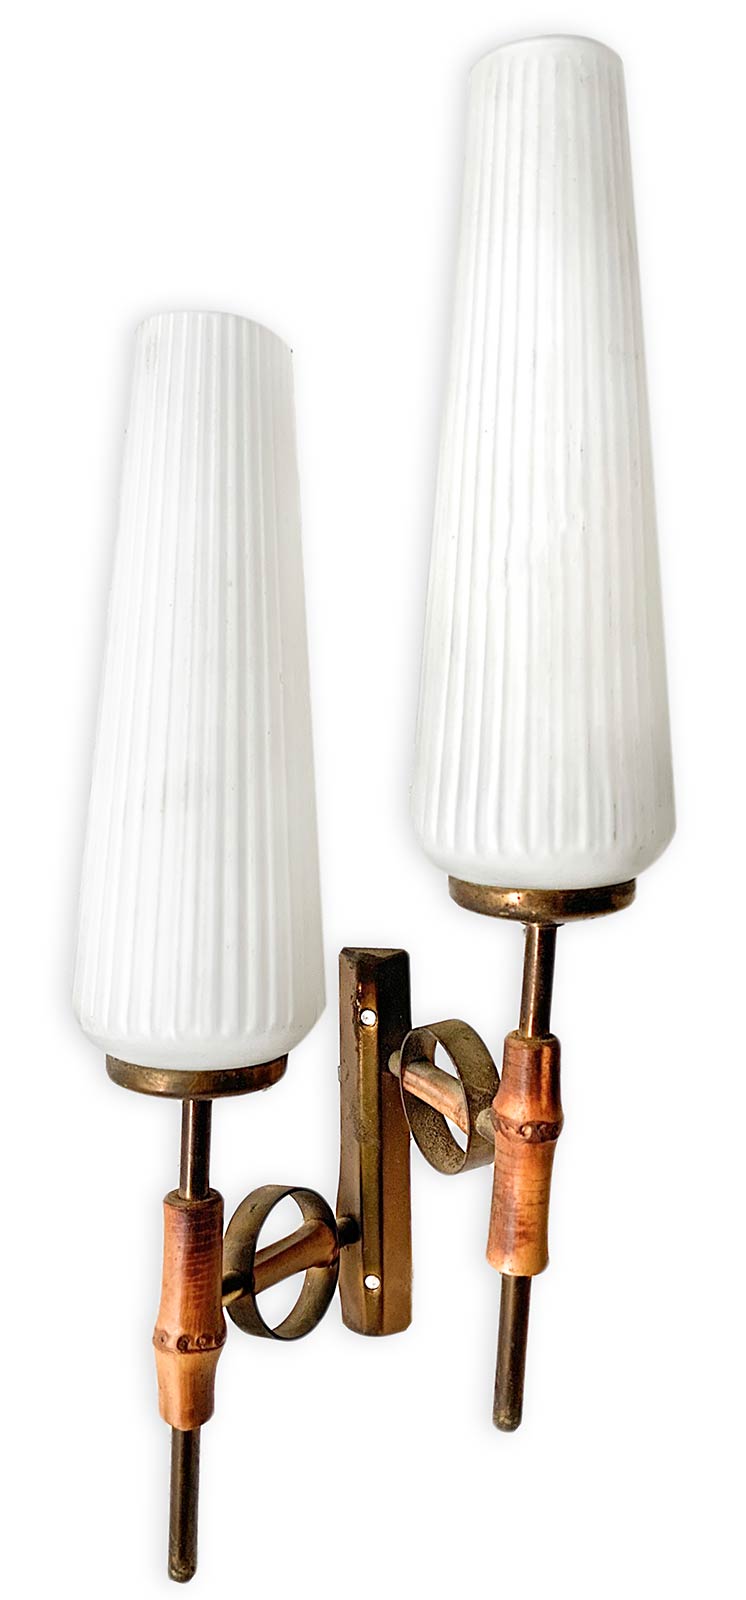 Applique, Italian production. Structure in brass, diffuser in white opal glass, bamboo detail,